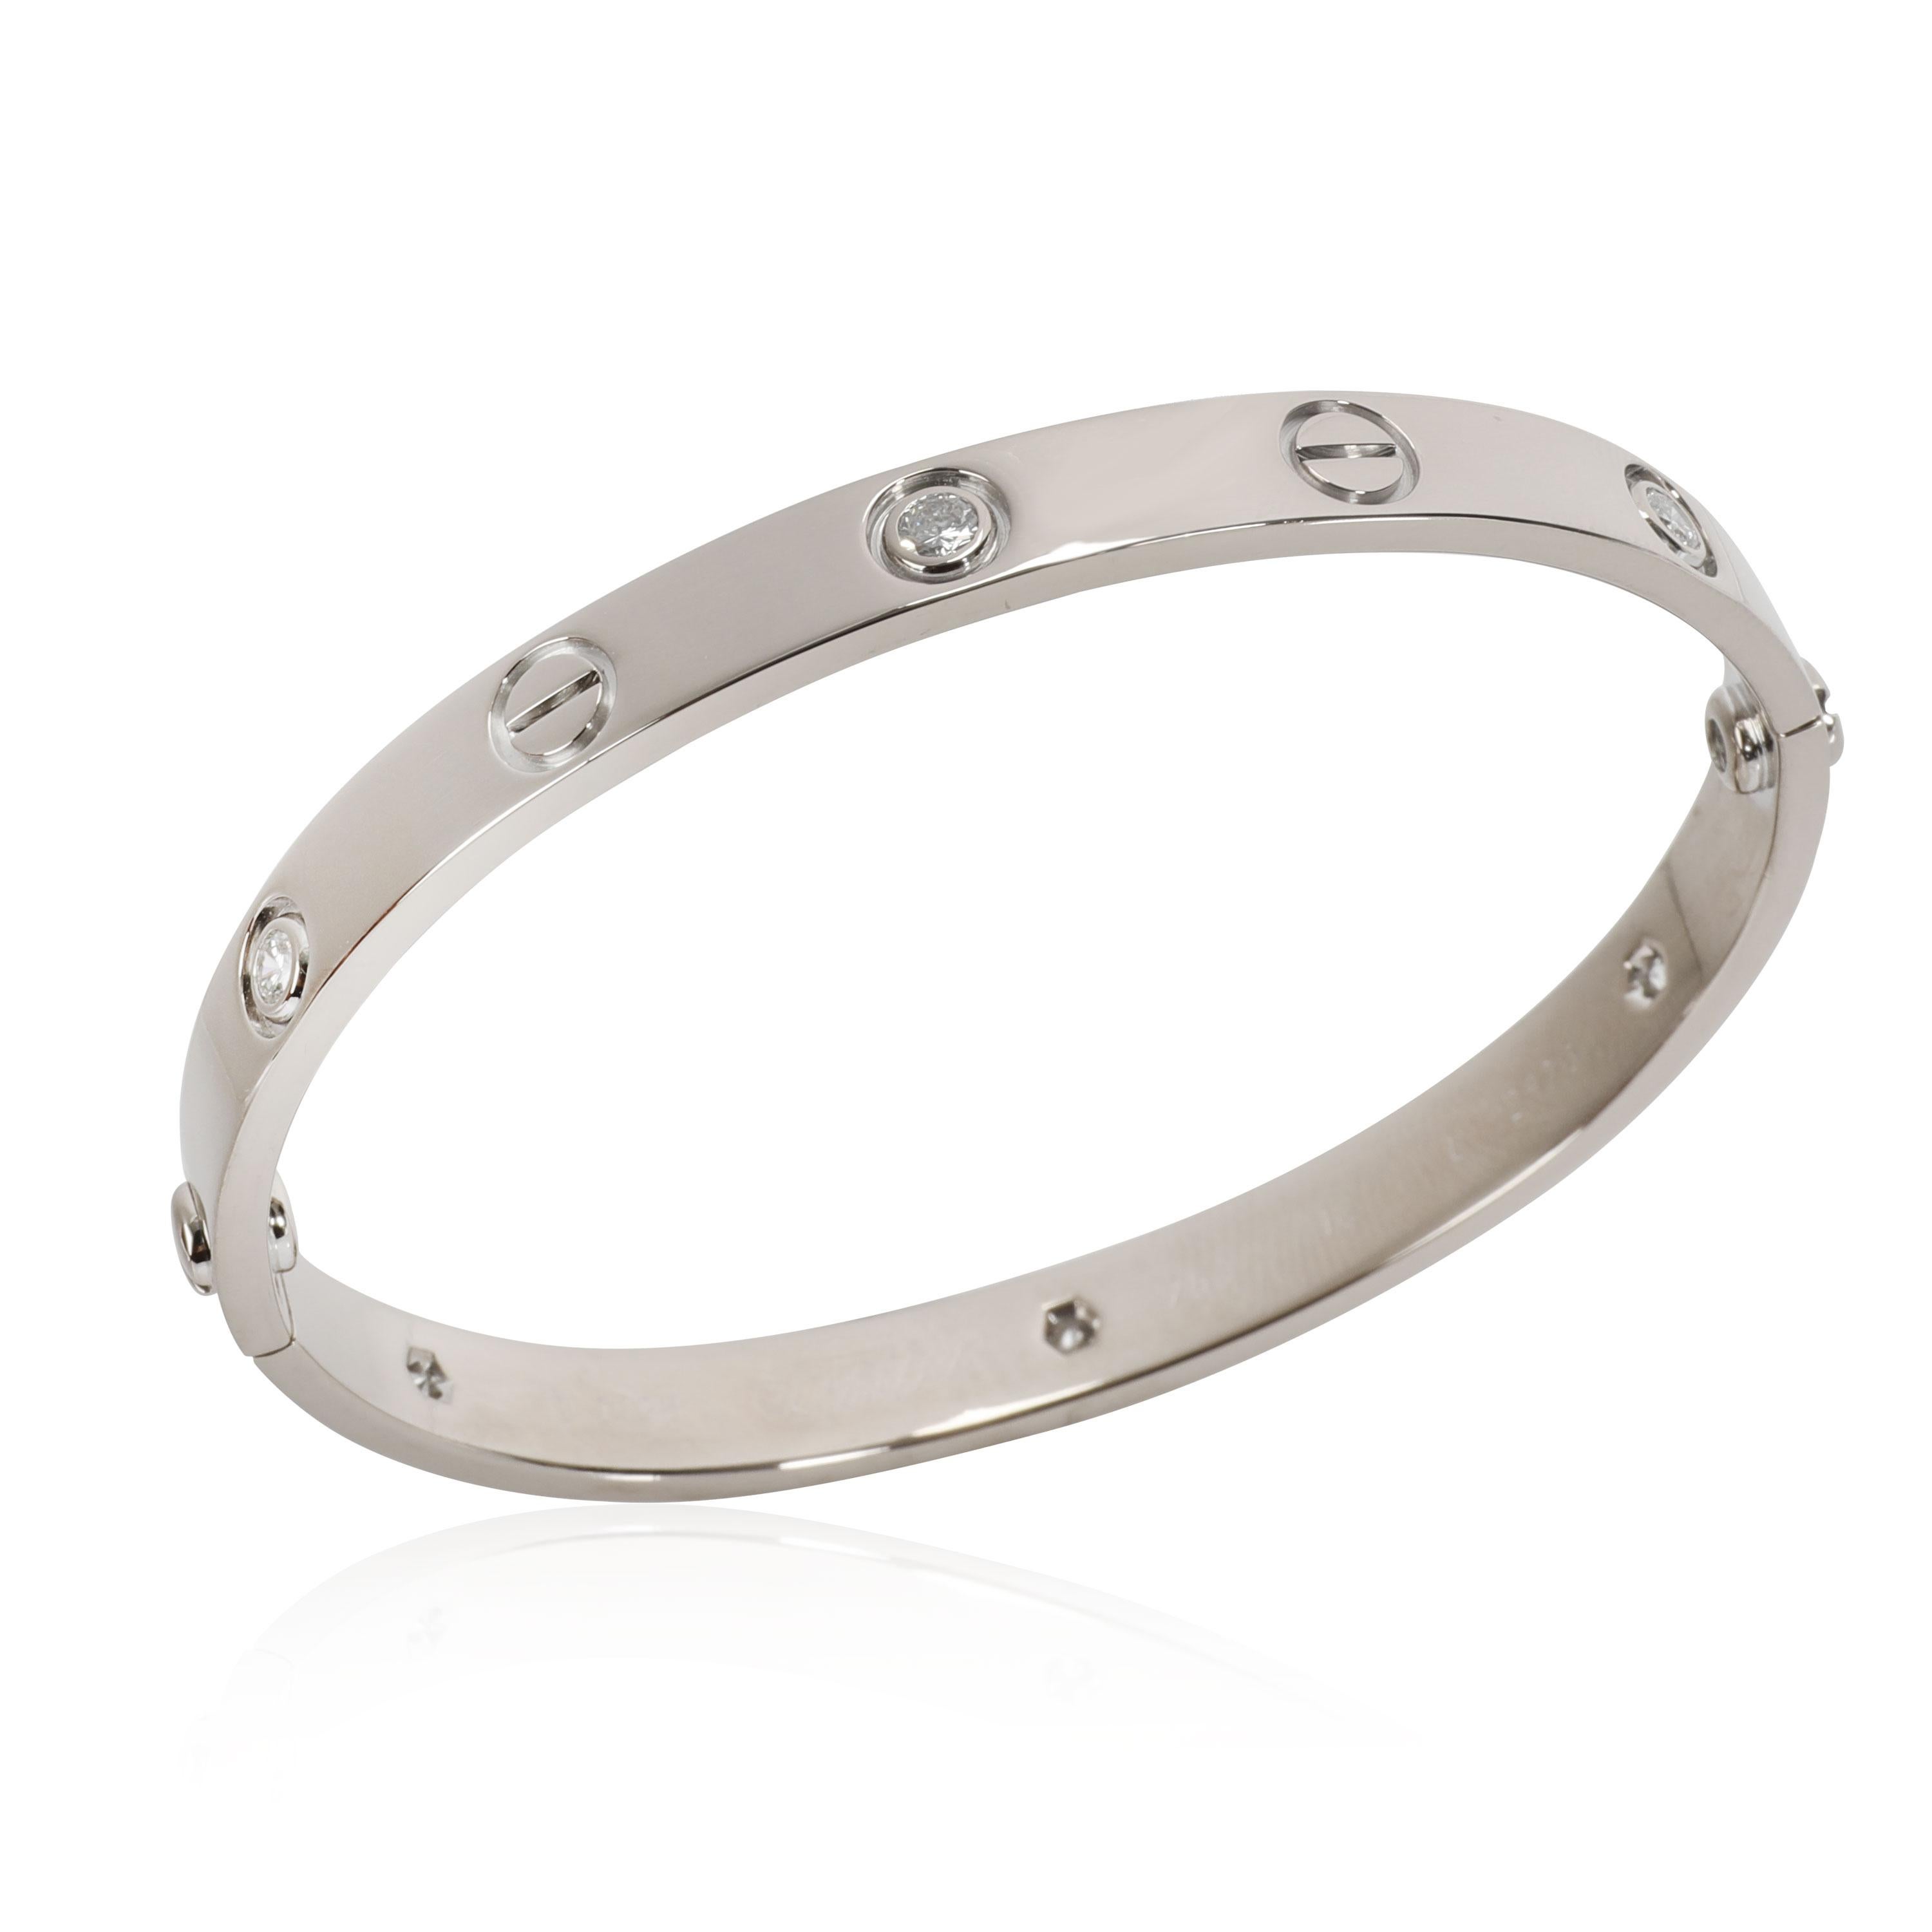 Cartier Love Bracelet with Diamonds in 18K White Gold 0.50 CTW

PRIMARY DETAILS
SKU: 110486
Cartier Love Bracelet with Diamonds in 18K White Gold 0.50 CTW

Condition Description: Retails for 14,000 USD. In excellent condition and recently polished.